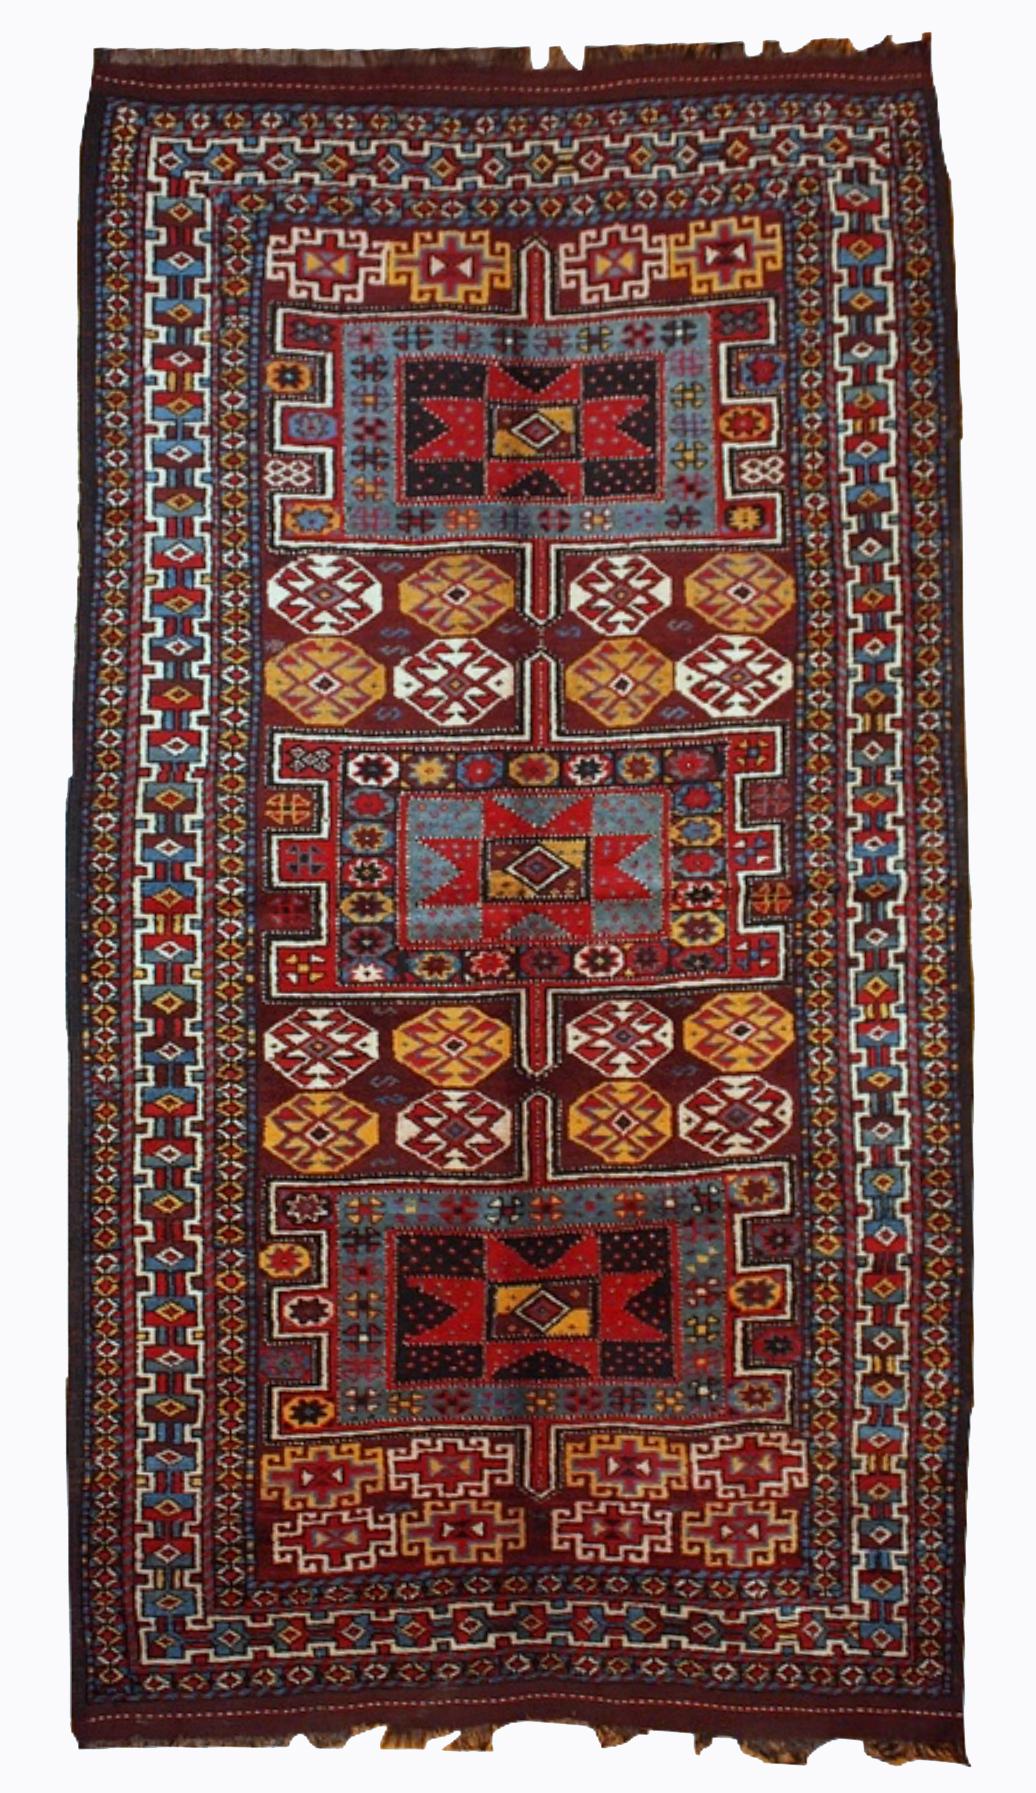 Antique Kurdish style rug in deep burgundy colour with some golden, white and sky blue shades. This rug is in original good condition. Measures: 4' x 8' (122cm x 243cm).